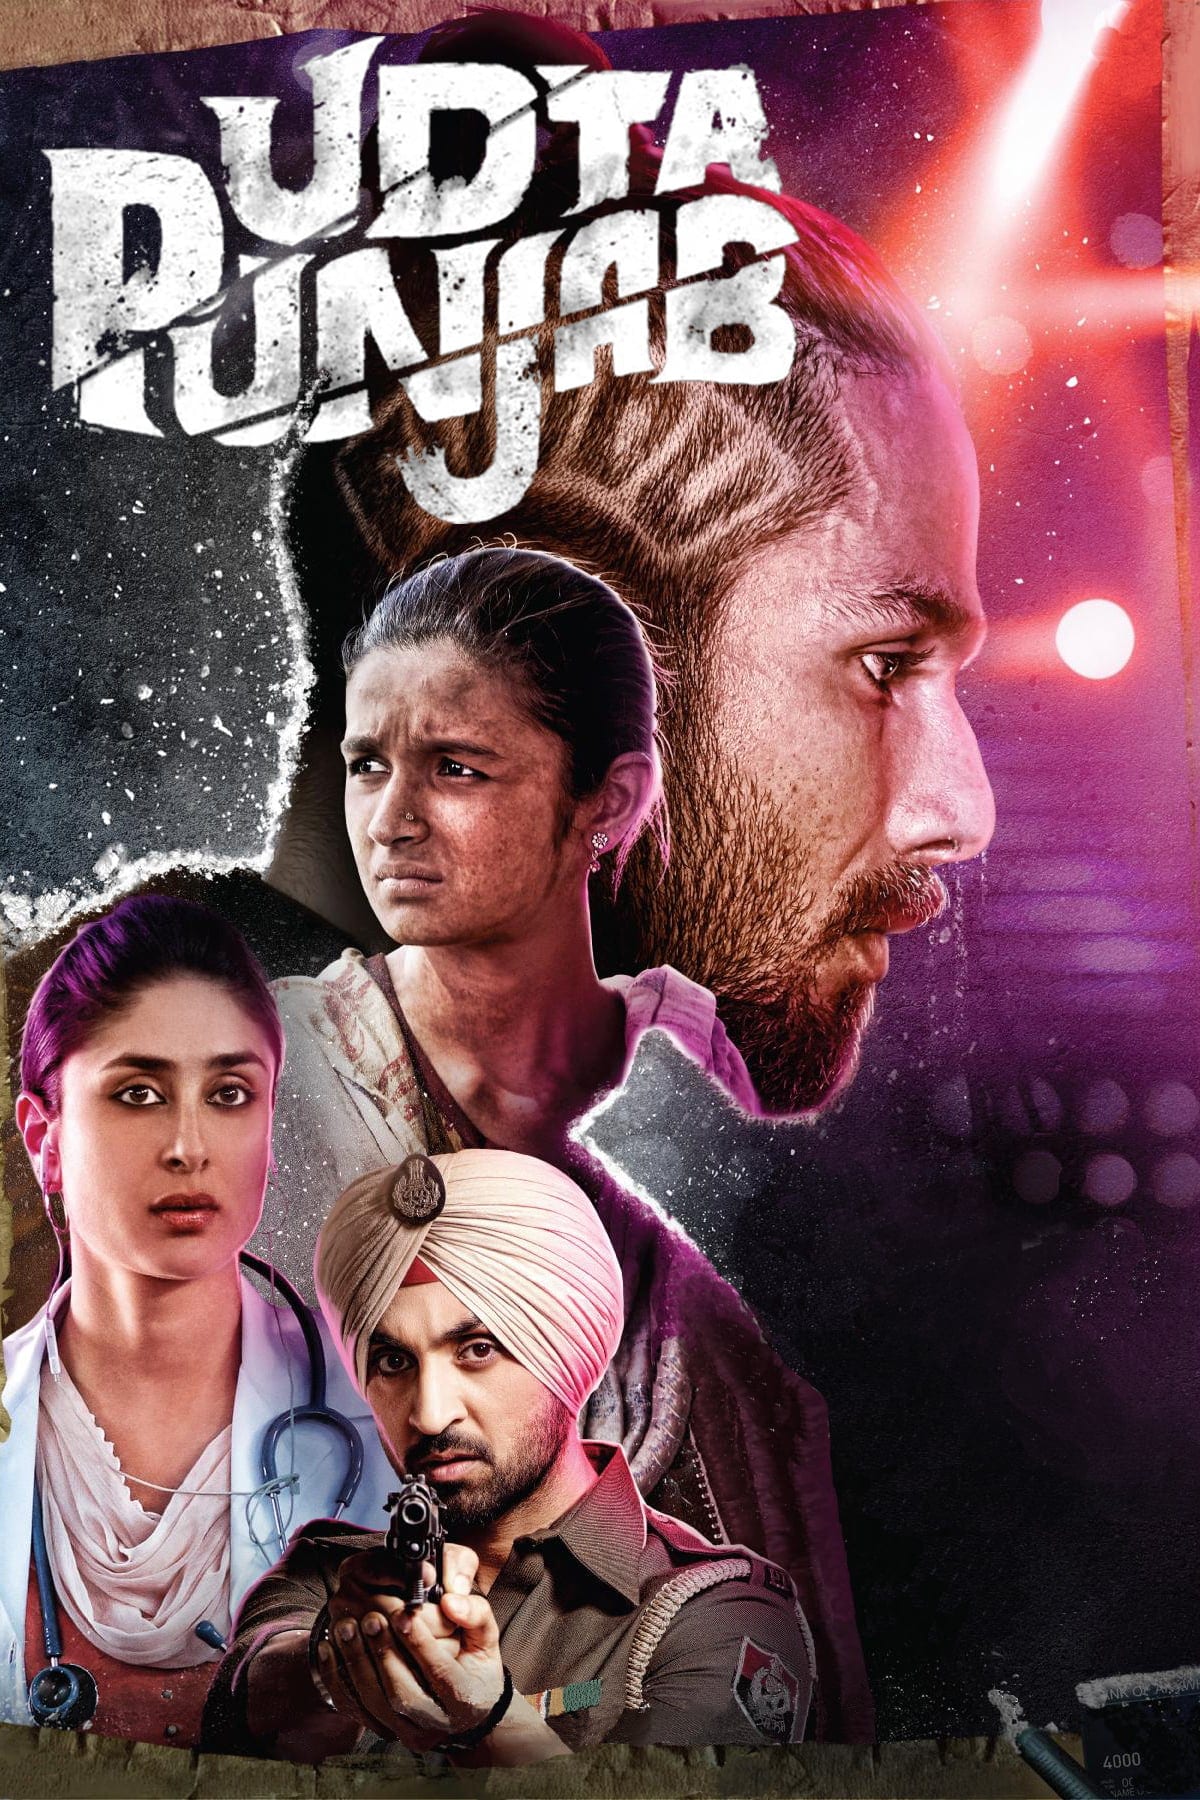 Poster for the movie "Udta Punjab"